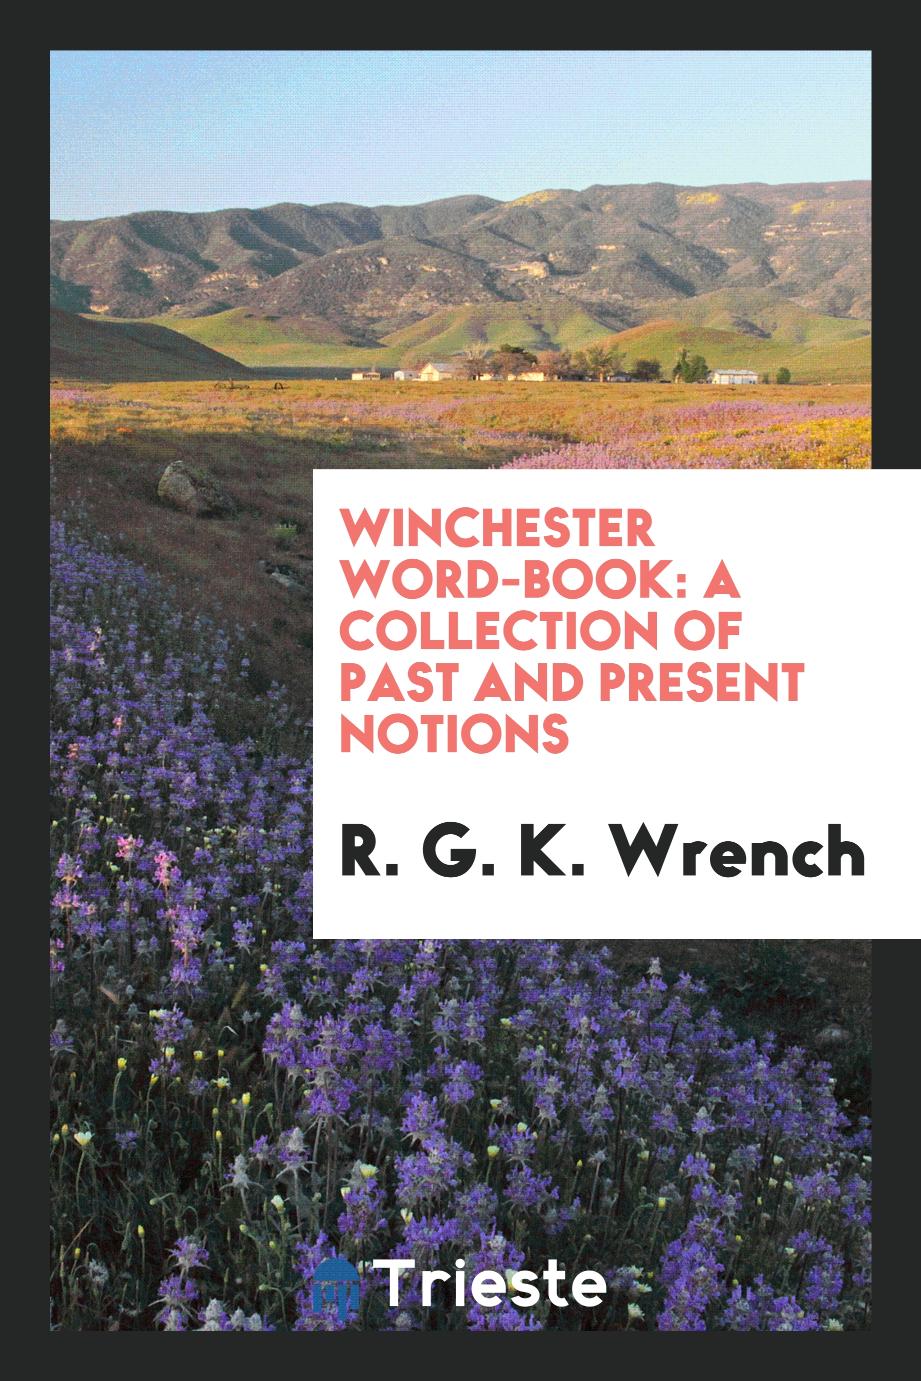 Winchester Word-book: A Collection of Past and Present Notions